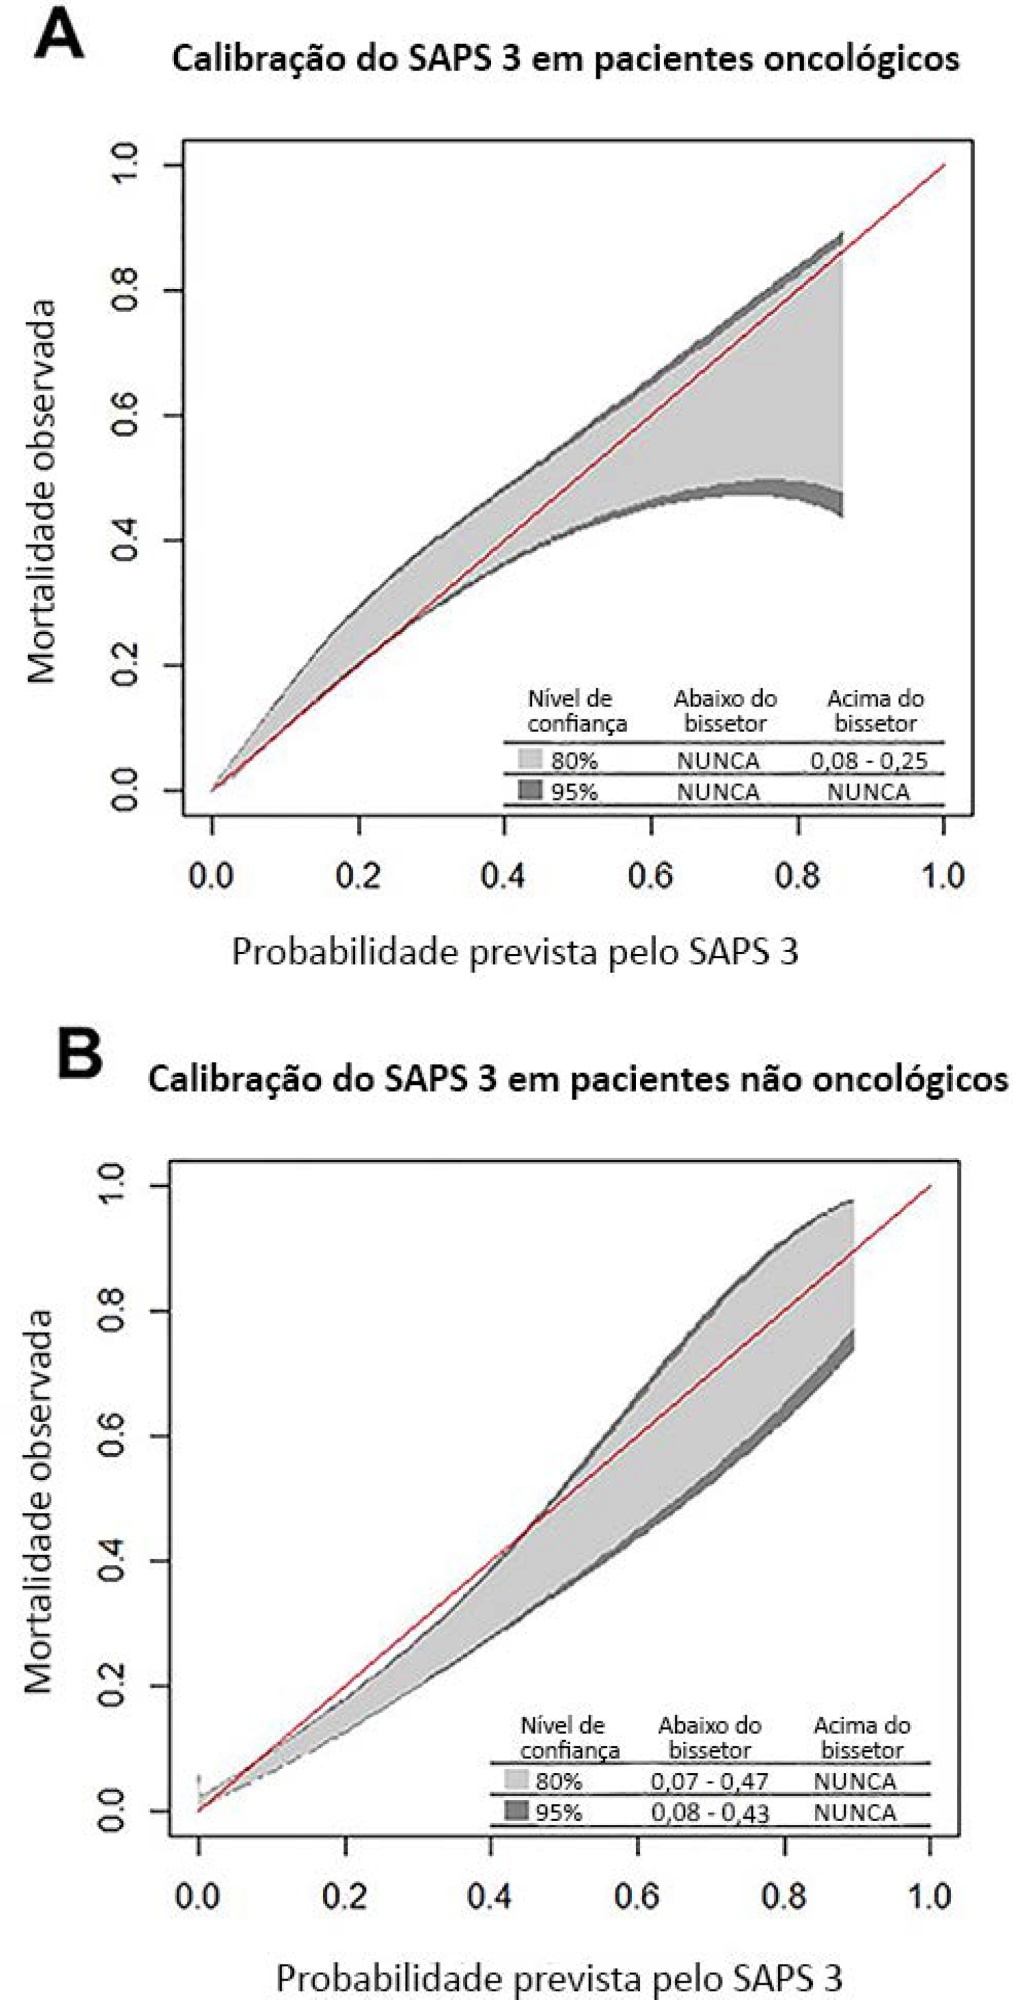 Comparison of SAPS 3 performance in patients with and without solid tumor admitted to an intensive care unit in Brazil: a retrospective cohort study